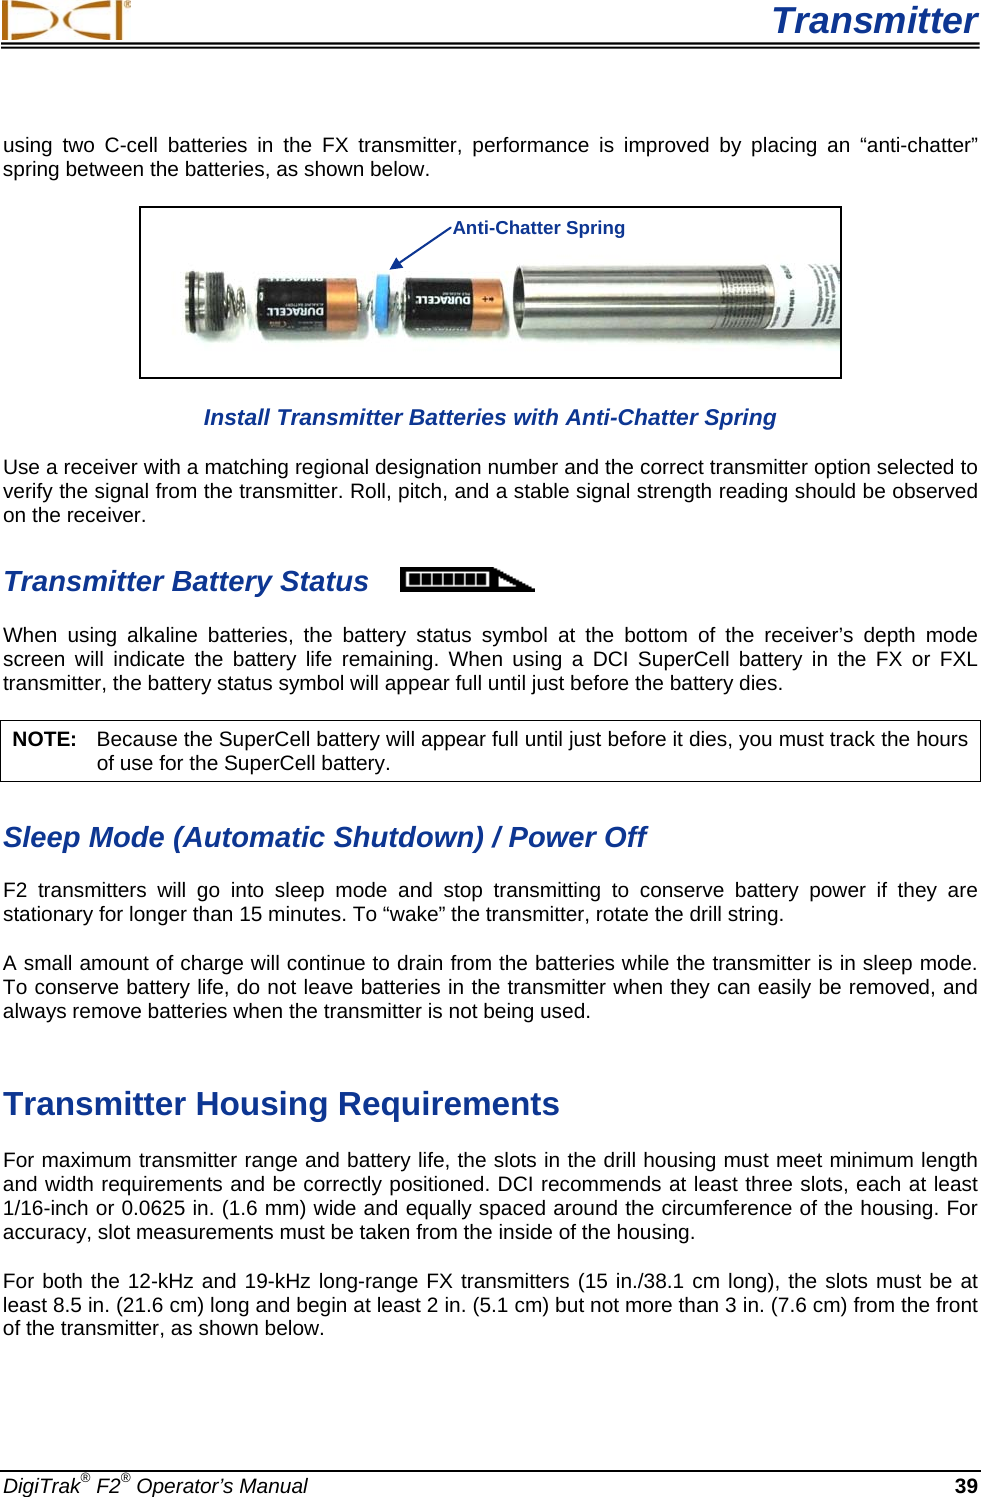  Transmitter DigiTrak® F2® Operator’s Manual 39 using two C-cell batteries in the FX transmitter, performance is improved by placing an “anti-chatter” spring between the batteries, as shown below.  Install Transmitter Batteries with Anti-Chatter Spring Use a receiver with a matching regional designation number and the correct transmitter option selected to verify the signal from the transmitter. Roll, pitch, and a stable signal strength reading should be observed on the receiver.  Transmitter Battery Status  When  using  alkaline batteries,  the battery  status  symbol  at the bottom of the receiver’s depth mode screen will indicate the battery life remaining.  When using a DCI SuperCell battery in the FX or FXL transmitter, the battery status symbol will appear full until just before the battery dies. NOTE:   Because the SuperCell battery will appear full until just before it dies, you must track the hours of use for the SuperCell battery. Sleep Mode (Automatic Shutdown) / Power Off F2  transmitters will go into sleep mode and stop transmitting to conserve battery power if they are stationary for longer than 15 minutes. To “wake” the transmitter, rotate the drill string.  A small amount of charge will continue to drain from the batteries while the transmitter is in sleep mode. To conserve battery life, do not leave batteries in the transmitter when they can easily be removed, and always remove batteries when the transmitter is not being used.   Transmitter Housing Requirements For maximum transmitter range and battery life, the slots in the drill housing must meet minimum length and width requirements and be correctly positioned. DCI recommends at least three slots, each at least 1/16-inch or 0.0625 in. (1.6 mm) wide and equally spaced around the circumference of the housing. For accuracy, slot measurements must be taken from the inside of the housing.  For both the 12-kHz and 19-kHz long-range FX transmitters (15 in./38.1 cm long), the slots must be at least 8.5 in. (21.6 cm) long and begin at least 2 in. (5.1 cm) but not more than 3 in. (7.6 cm) from the front of the transmitter, as shown below. Anti-Chatter Spring 